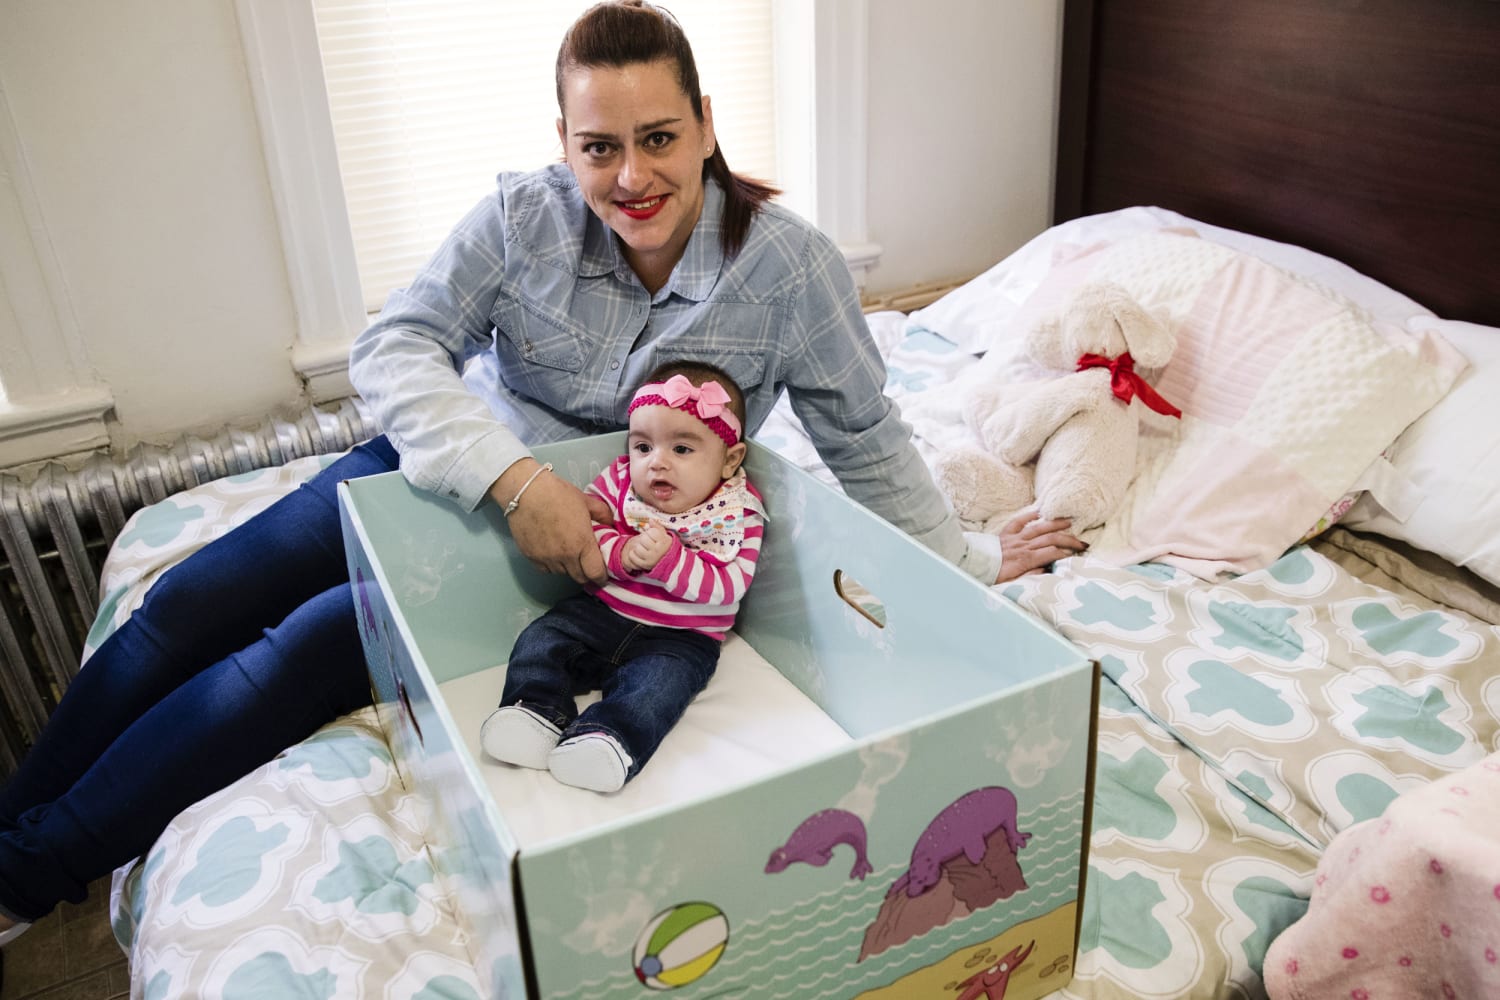 Sleutel discretie Darmen Hospitals Give Away Baby Boxes to Curb Infant Mortality